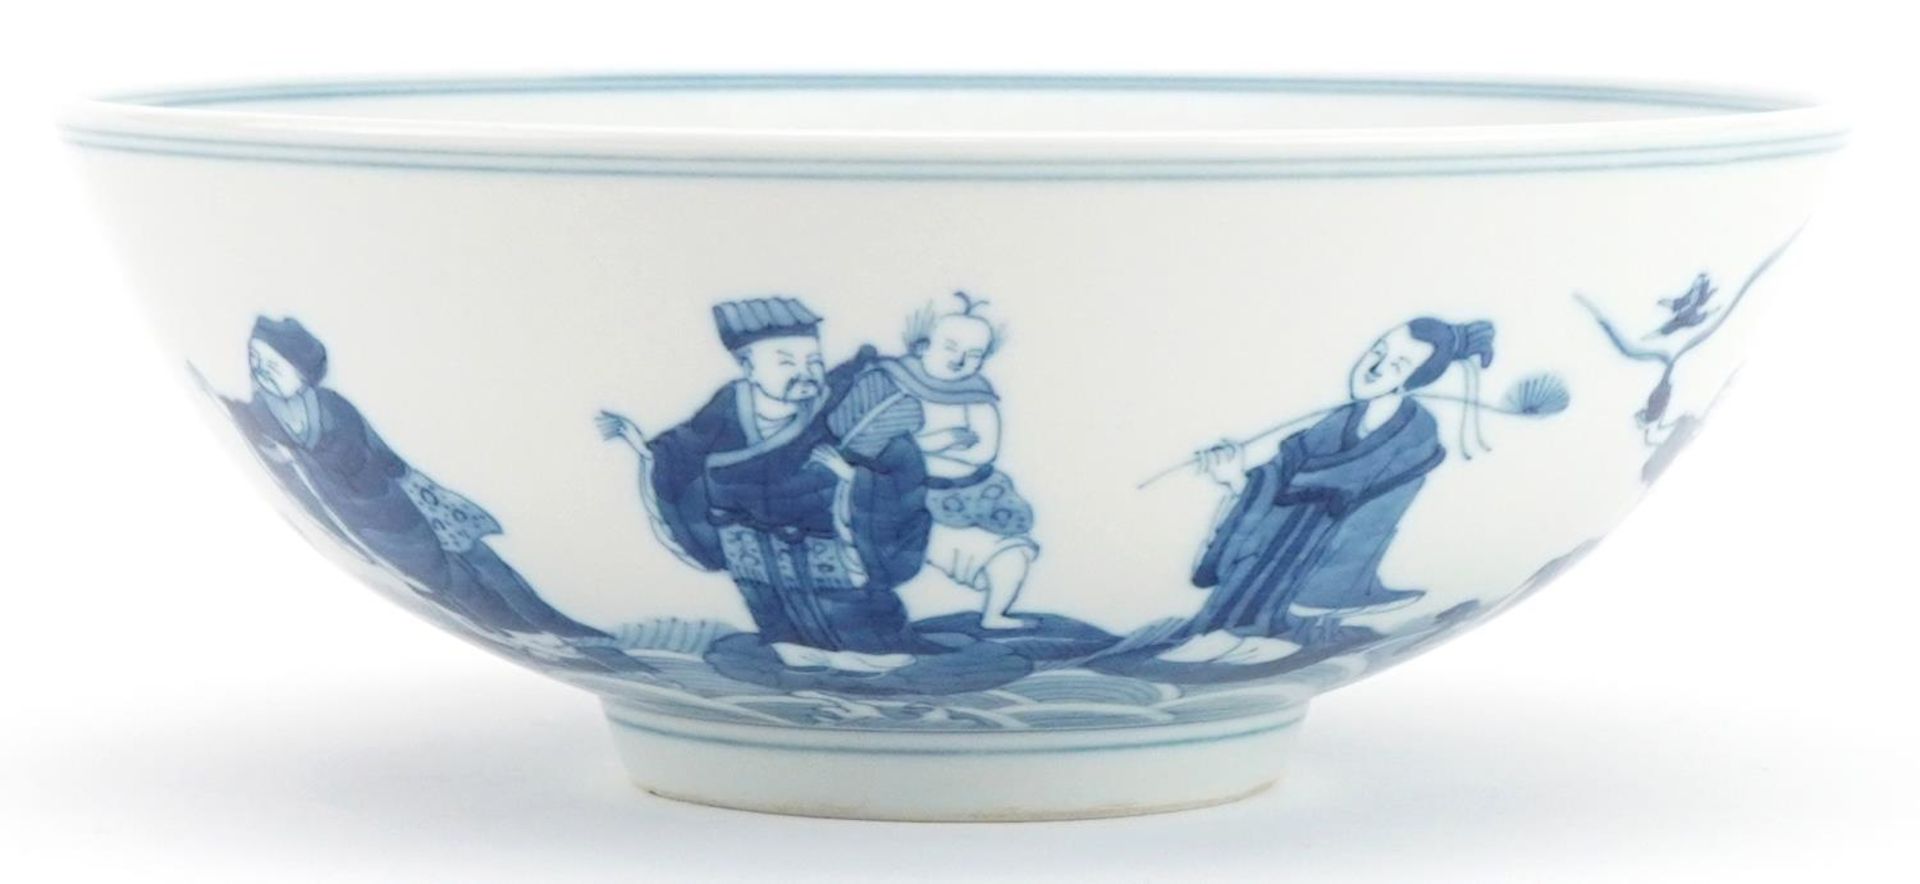 Chinese porcelain footed bowl hand painted with immortals above crashing waves, six figure character - Image 2 of 7